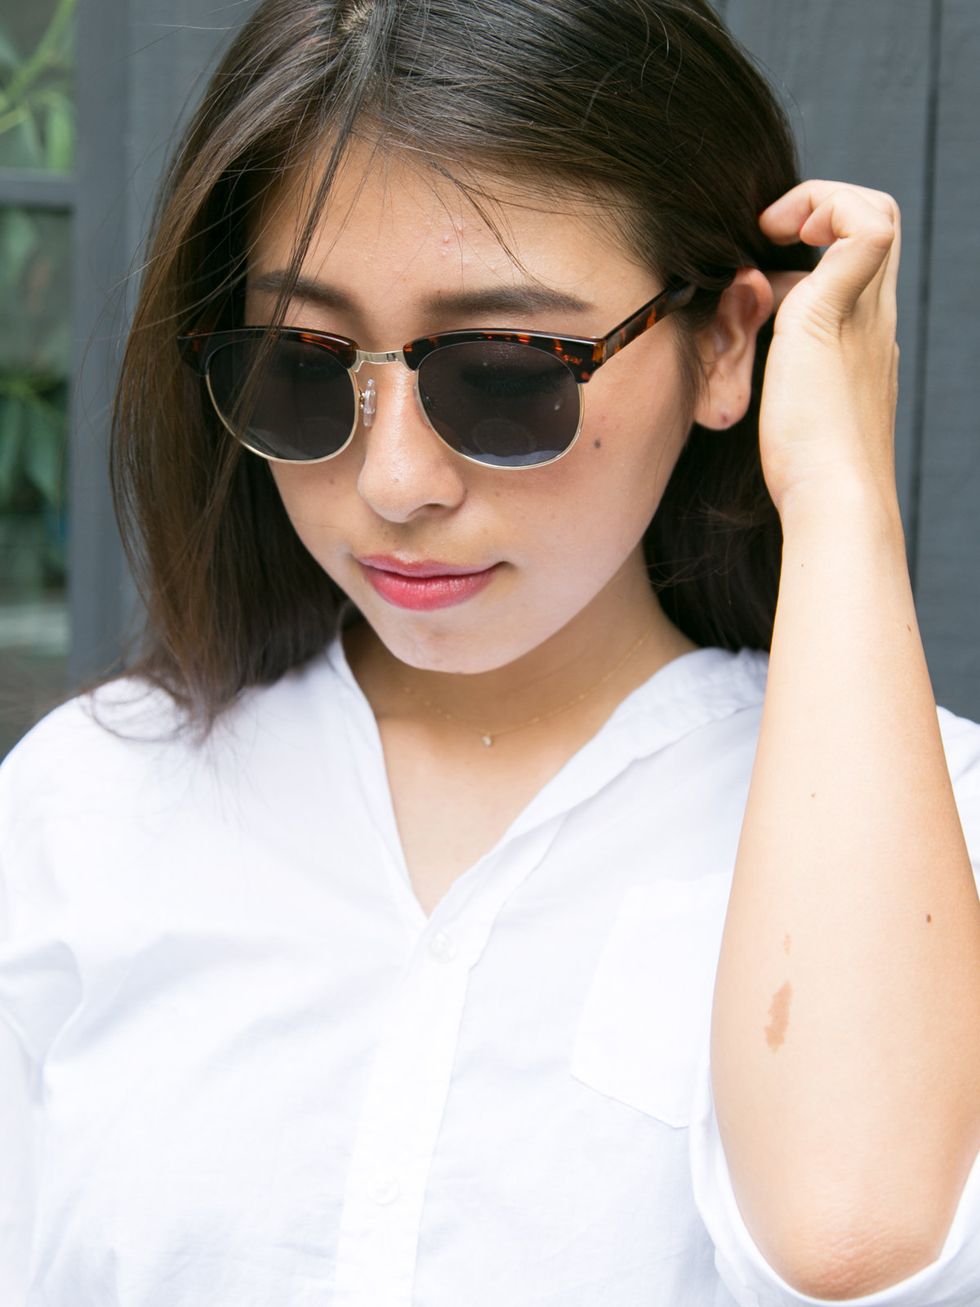 Eyewear, Sunglasses, Glasses, Hair, White, Face, Cool, Lip, Hairstyle, Beauty, 